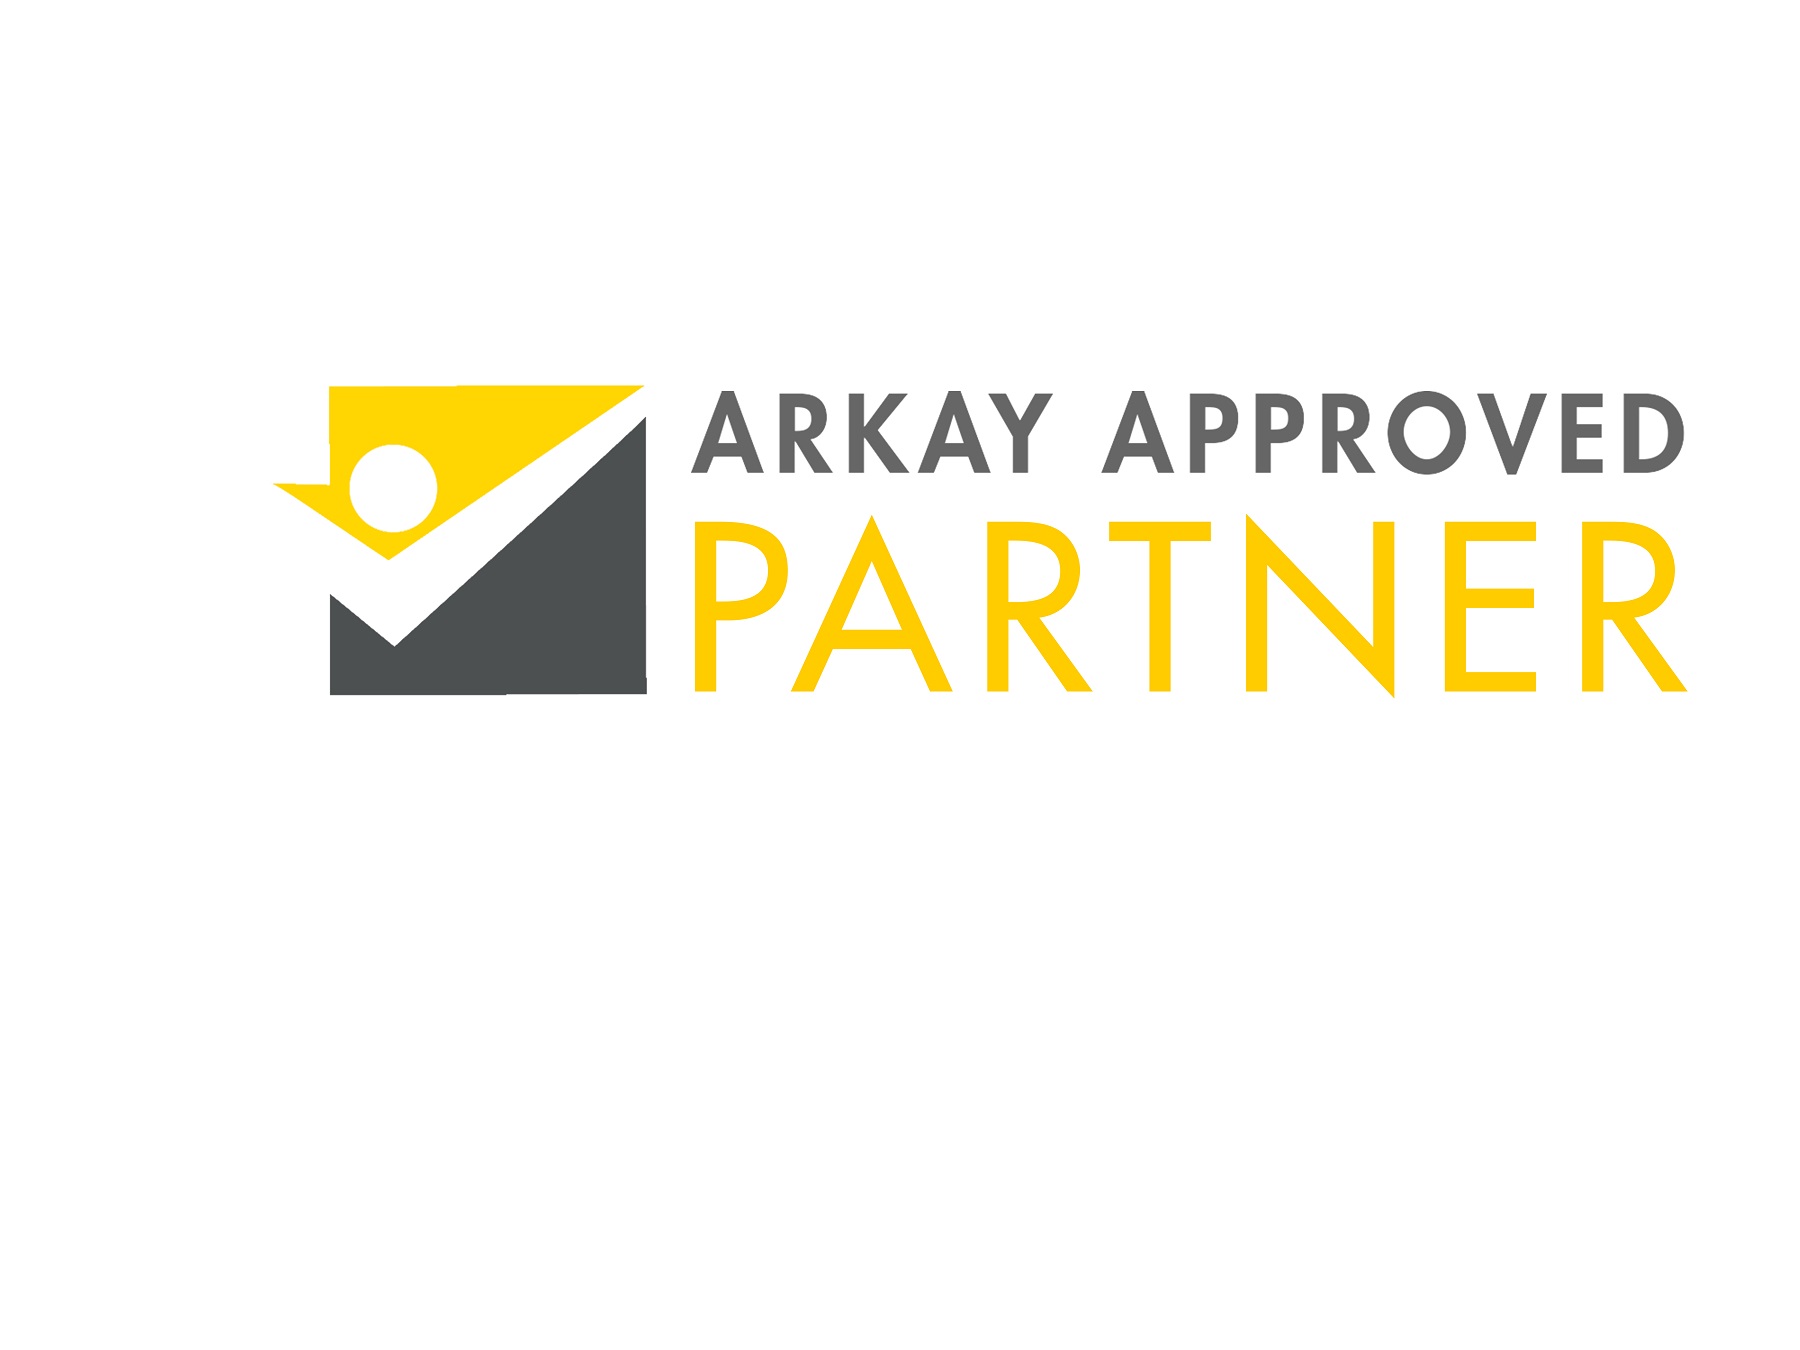 Arkay Windows has launched its Approved Partner Scheme.